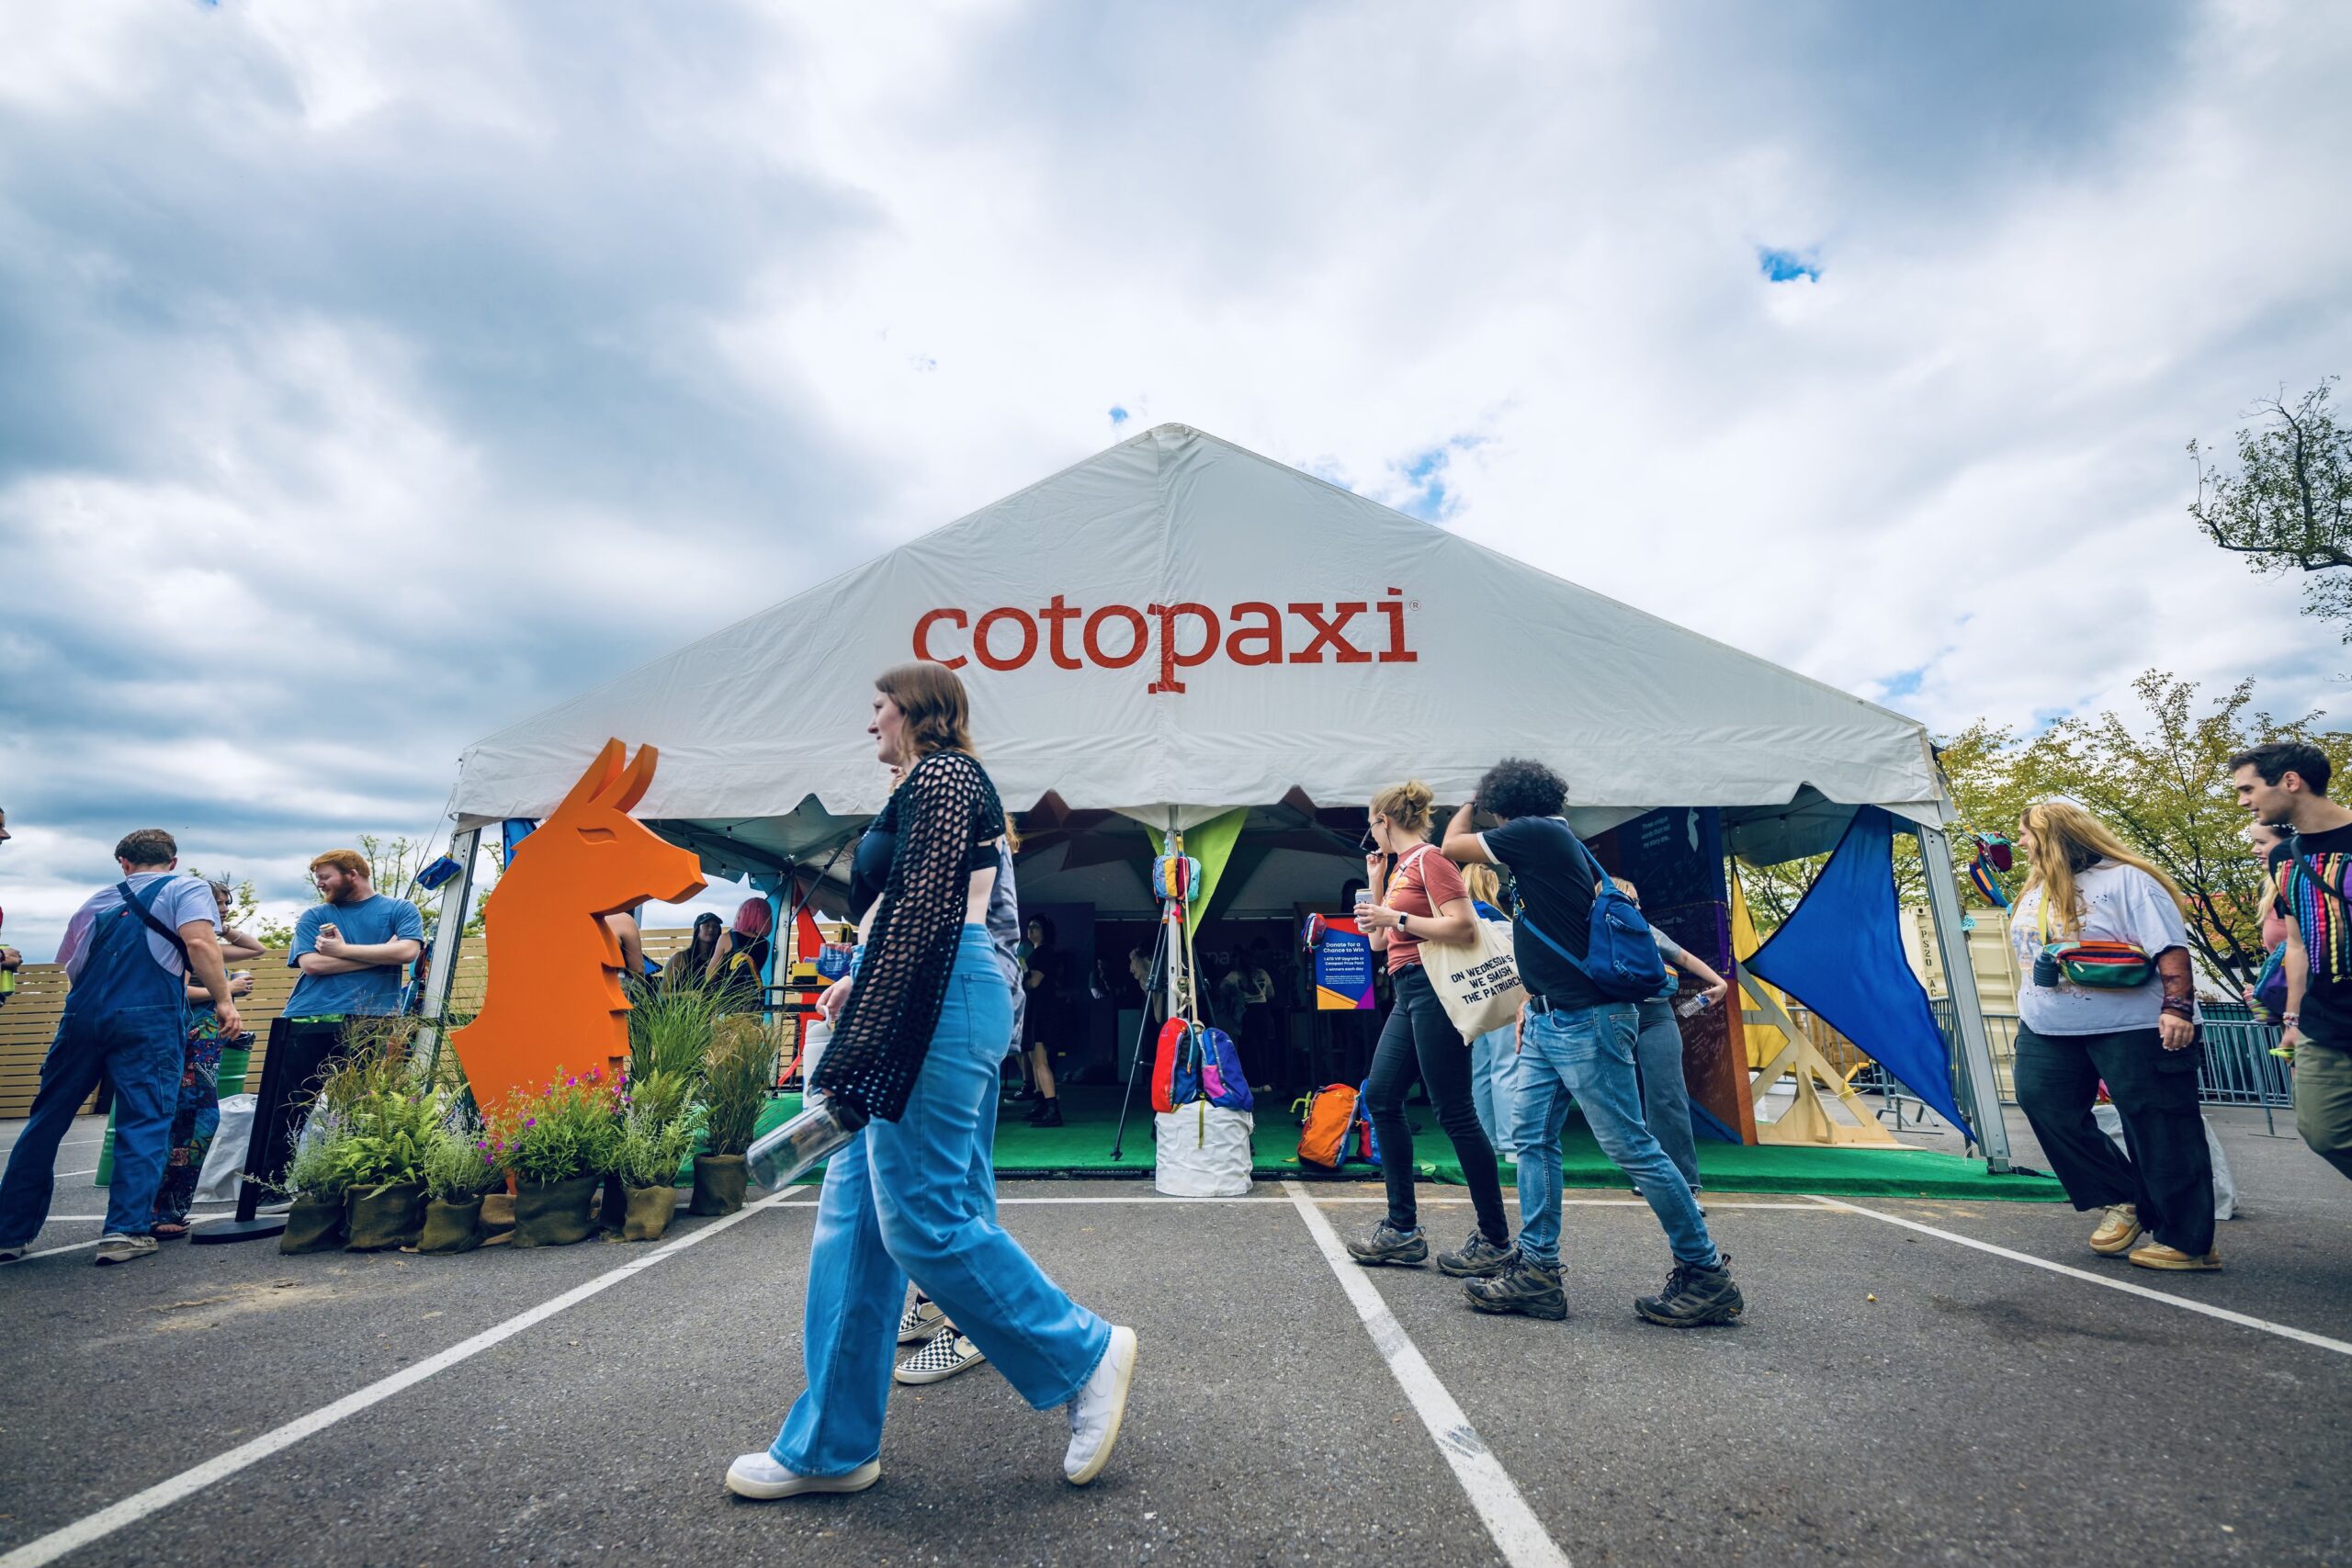 The front of the Cotopaxi tent at All Things Go.